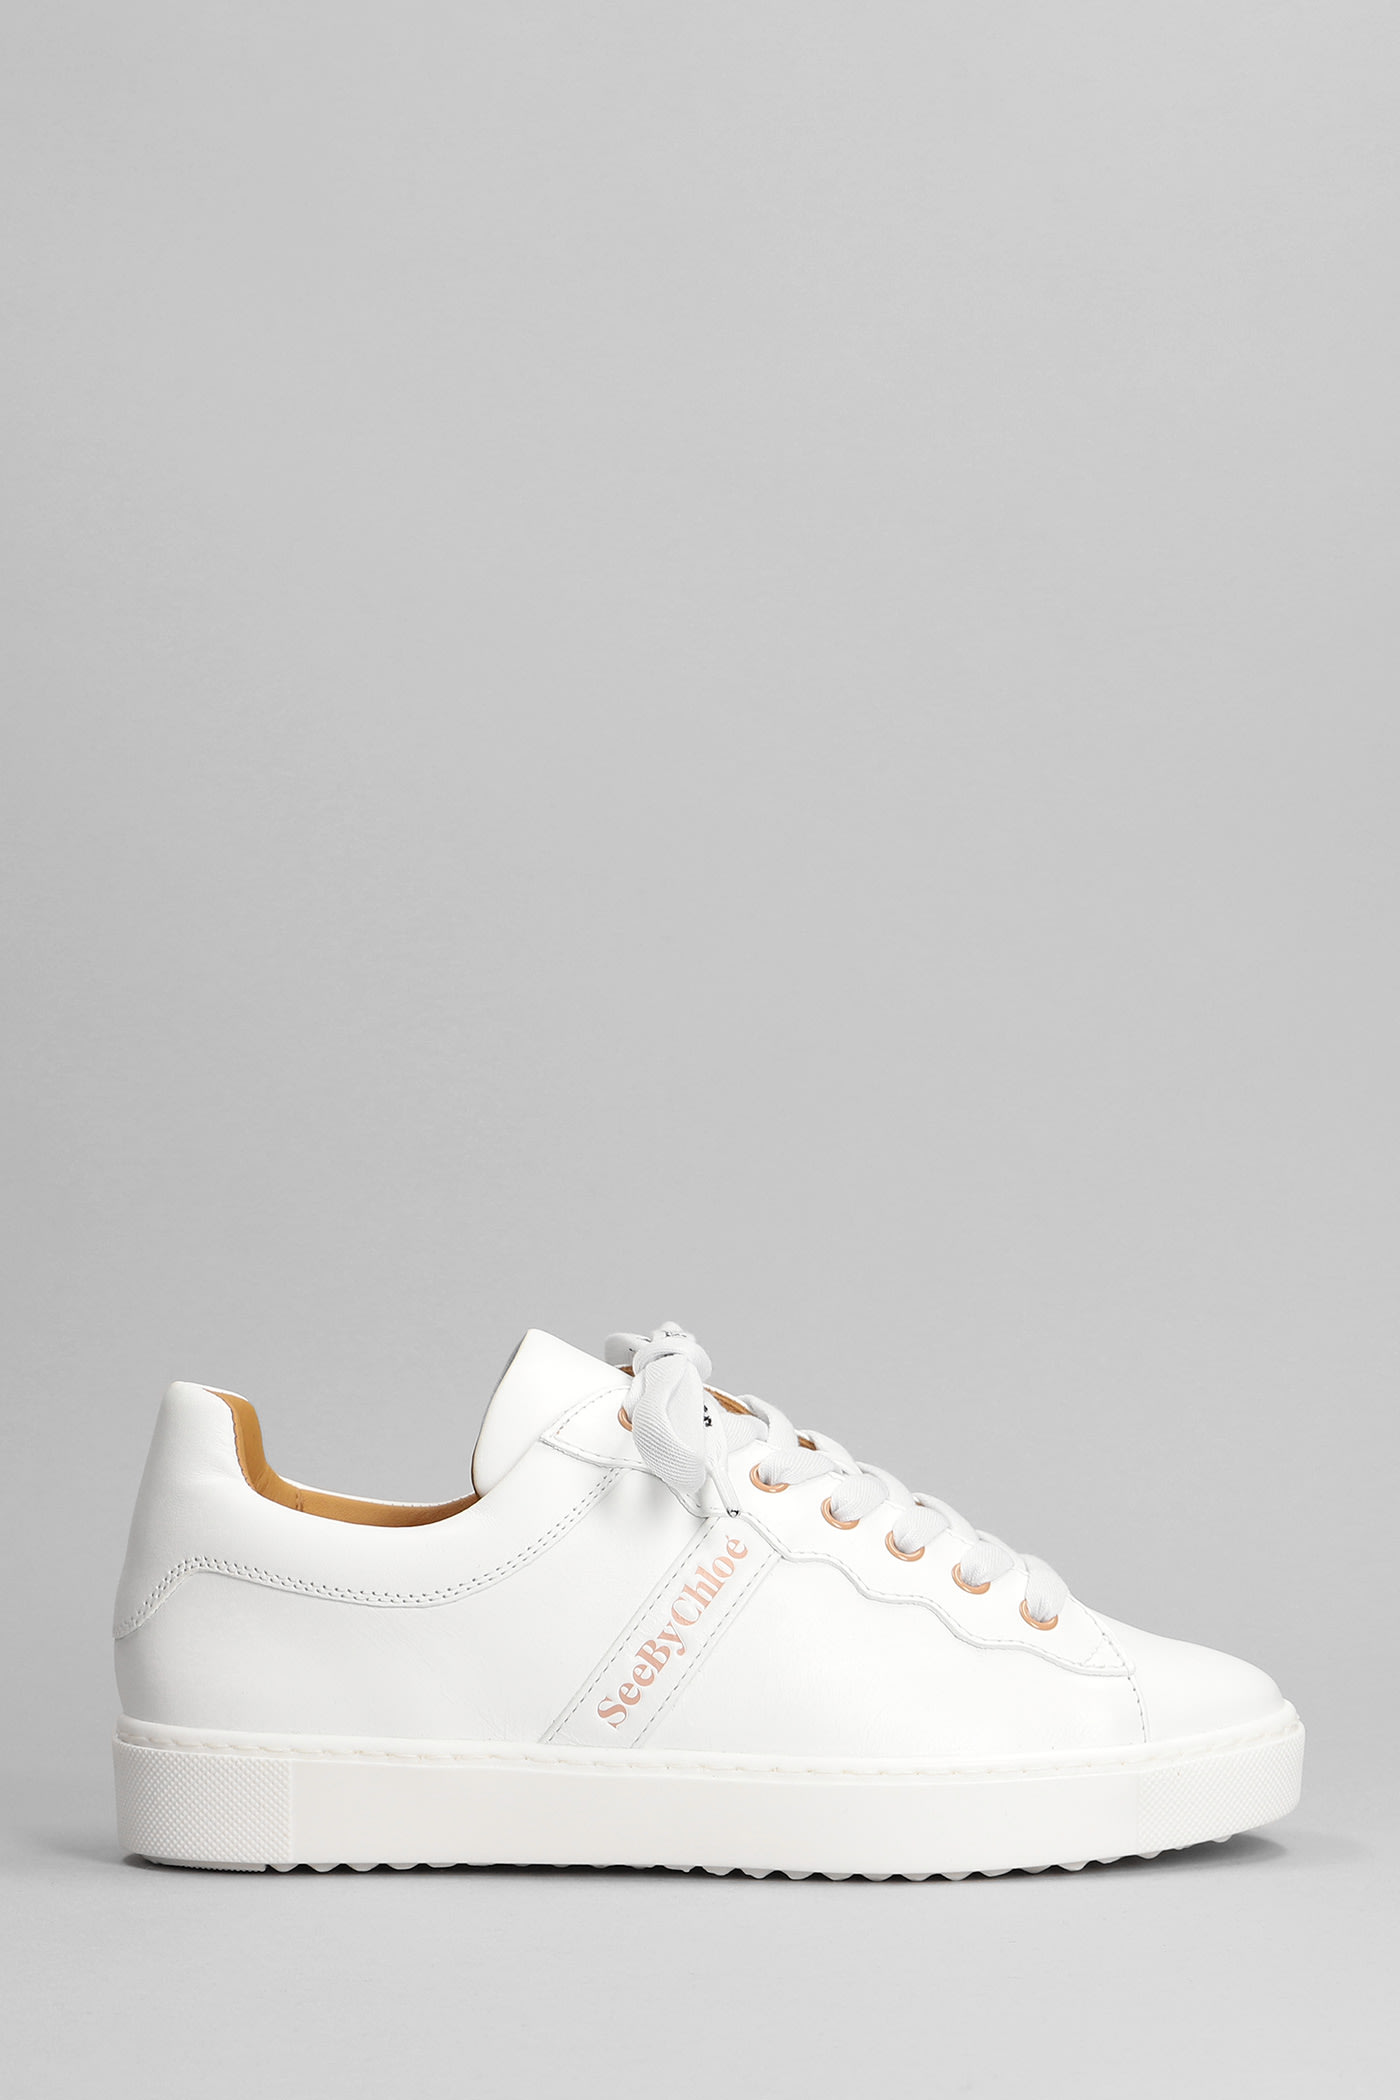 See by Chloé Essie Sneakers In White Leather